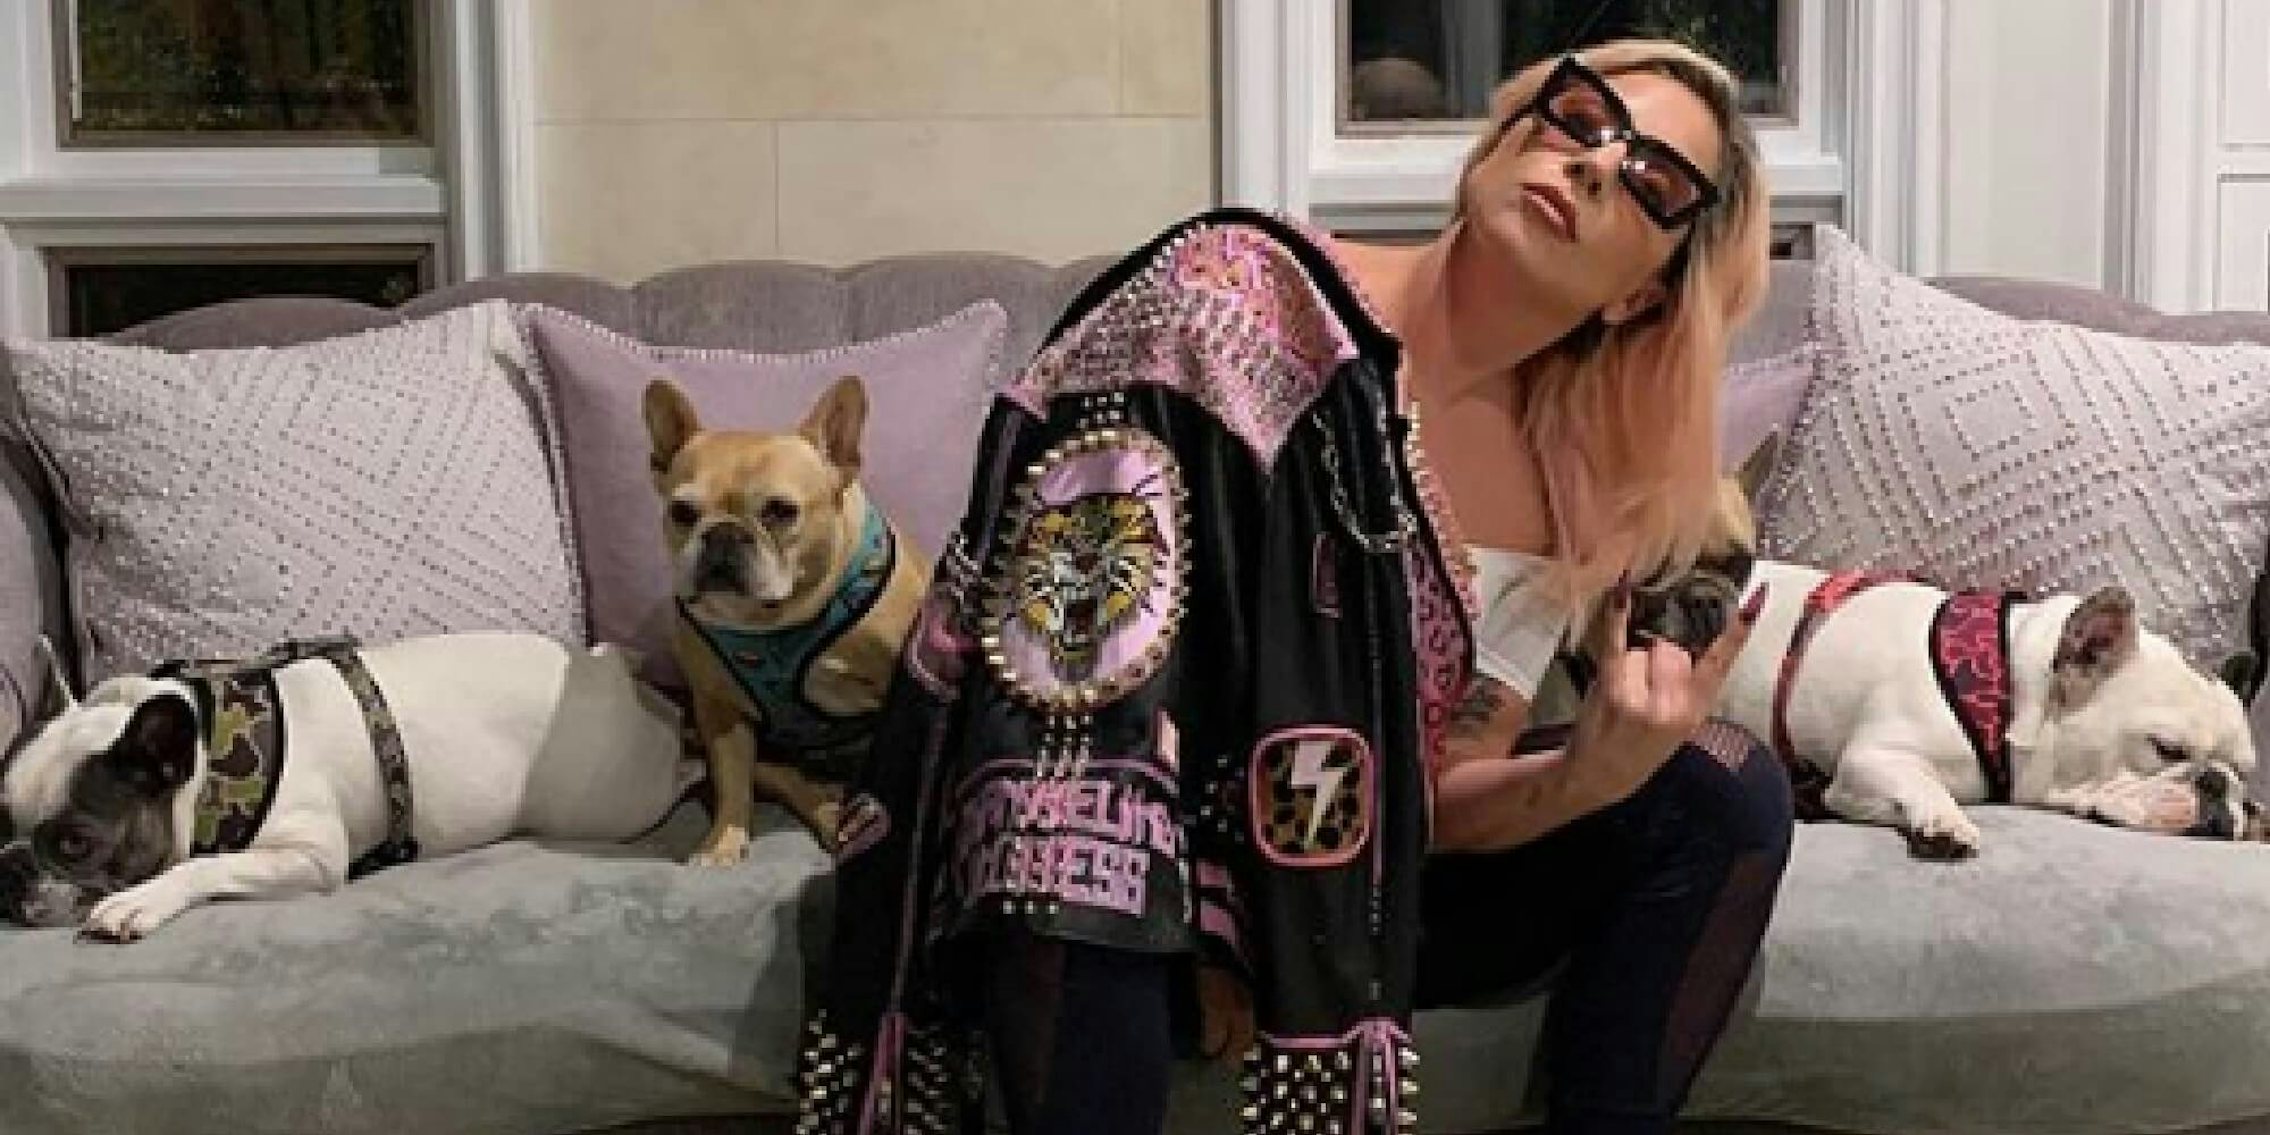 Lady Gaga poses with dogs in self isolation for coronavirus